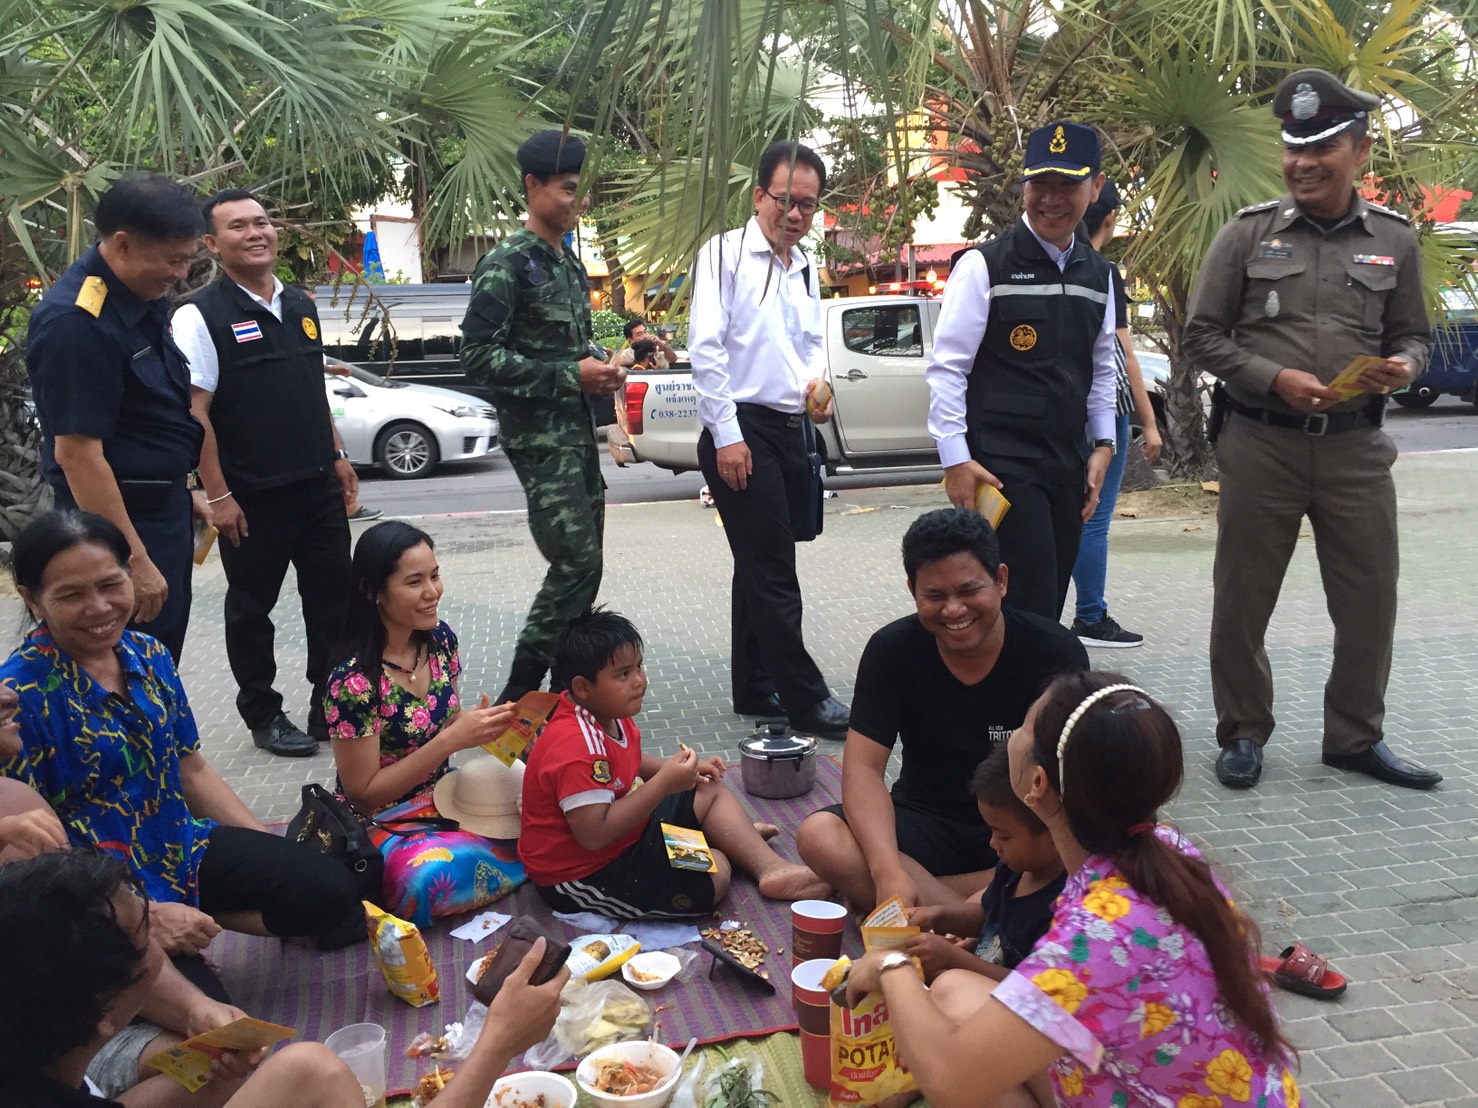 Banglamung District Chief Naris Niramaiwong and Pattaya police chief Pol. Col. Apichai Kroppech were joined by public health officials on a walk along Beach Road looking for alcohol being sold and consumed in forbidden places.